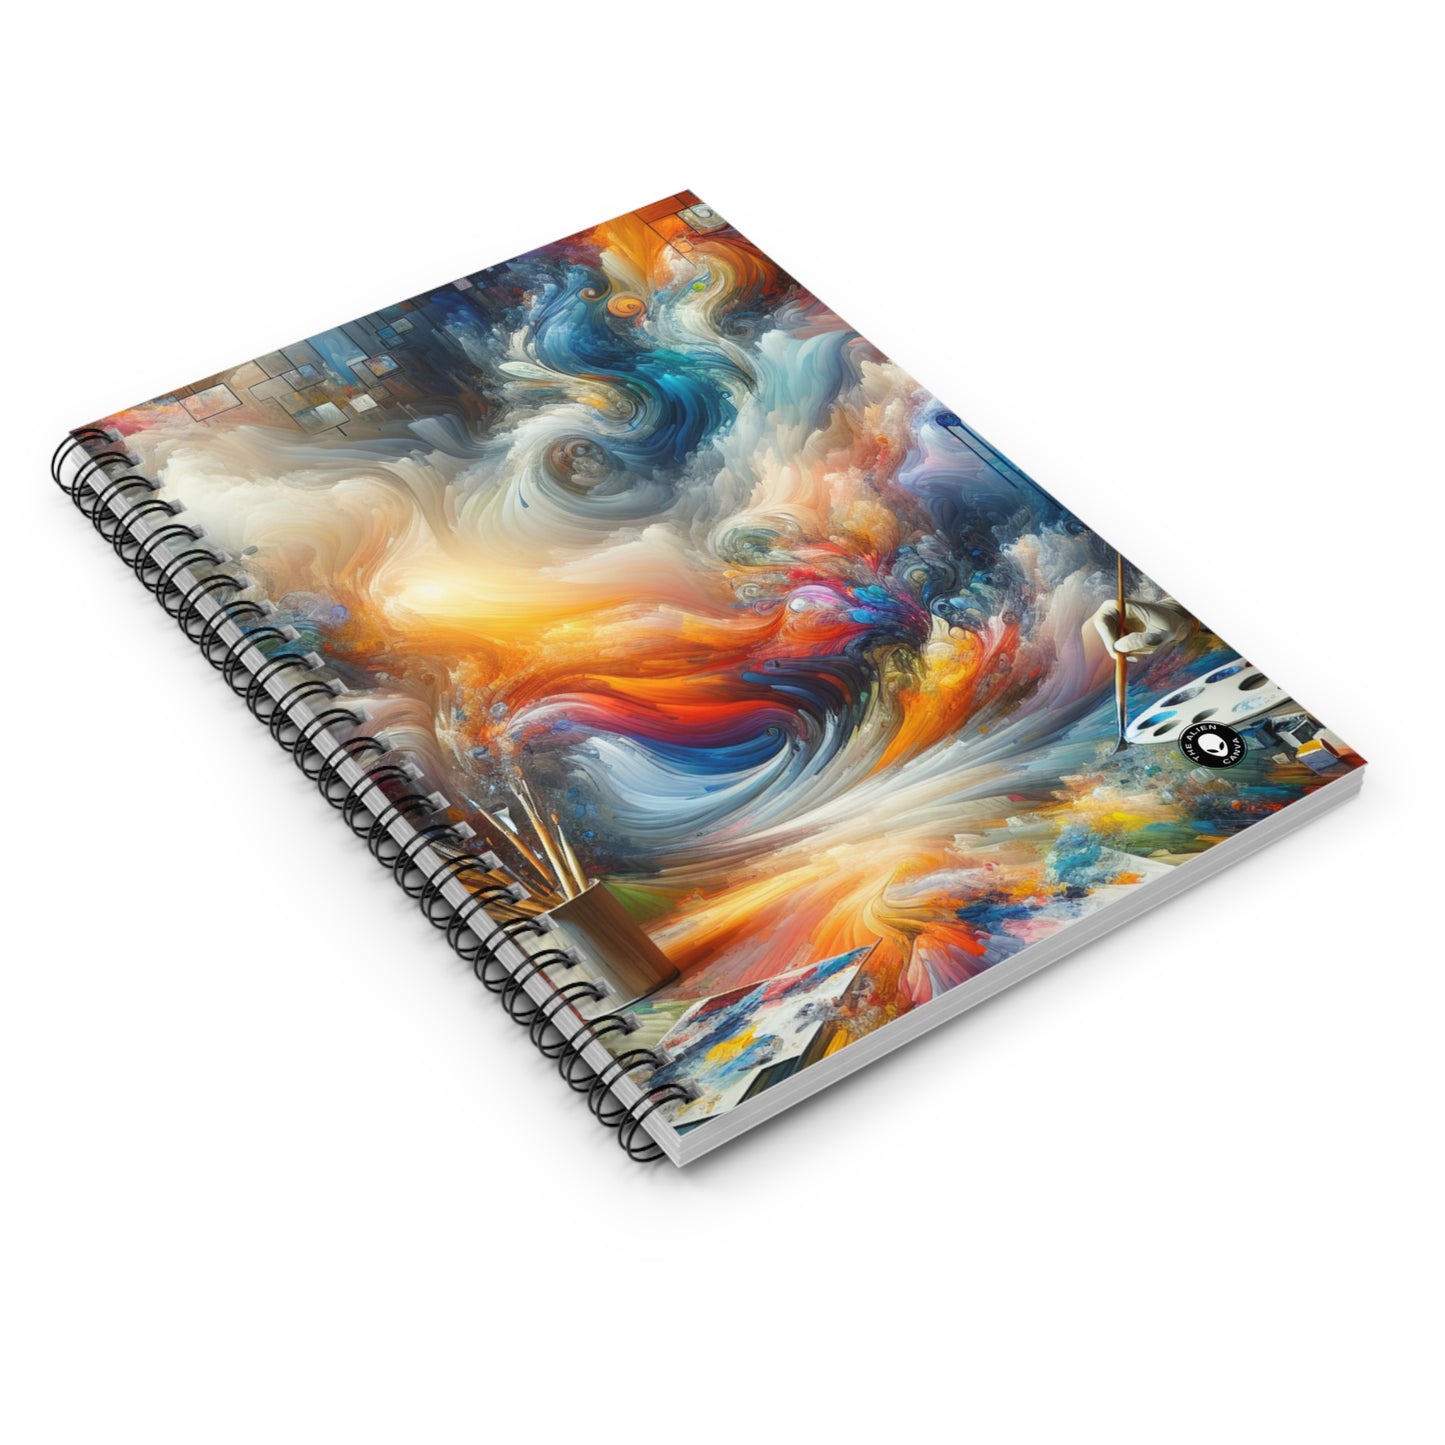 "Mystical Forest: A Whimsical Wonderland" - The Alien Spiral Notebook (Ruled Line) Digital Painting